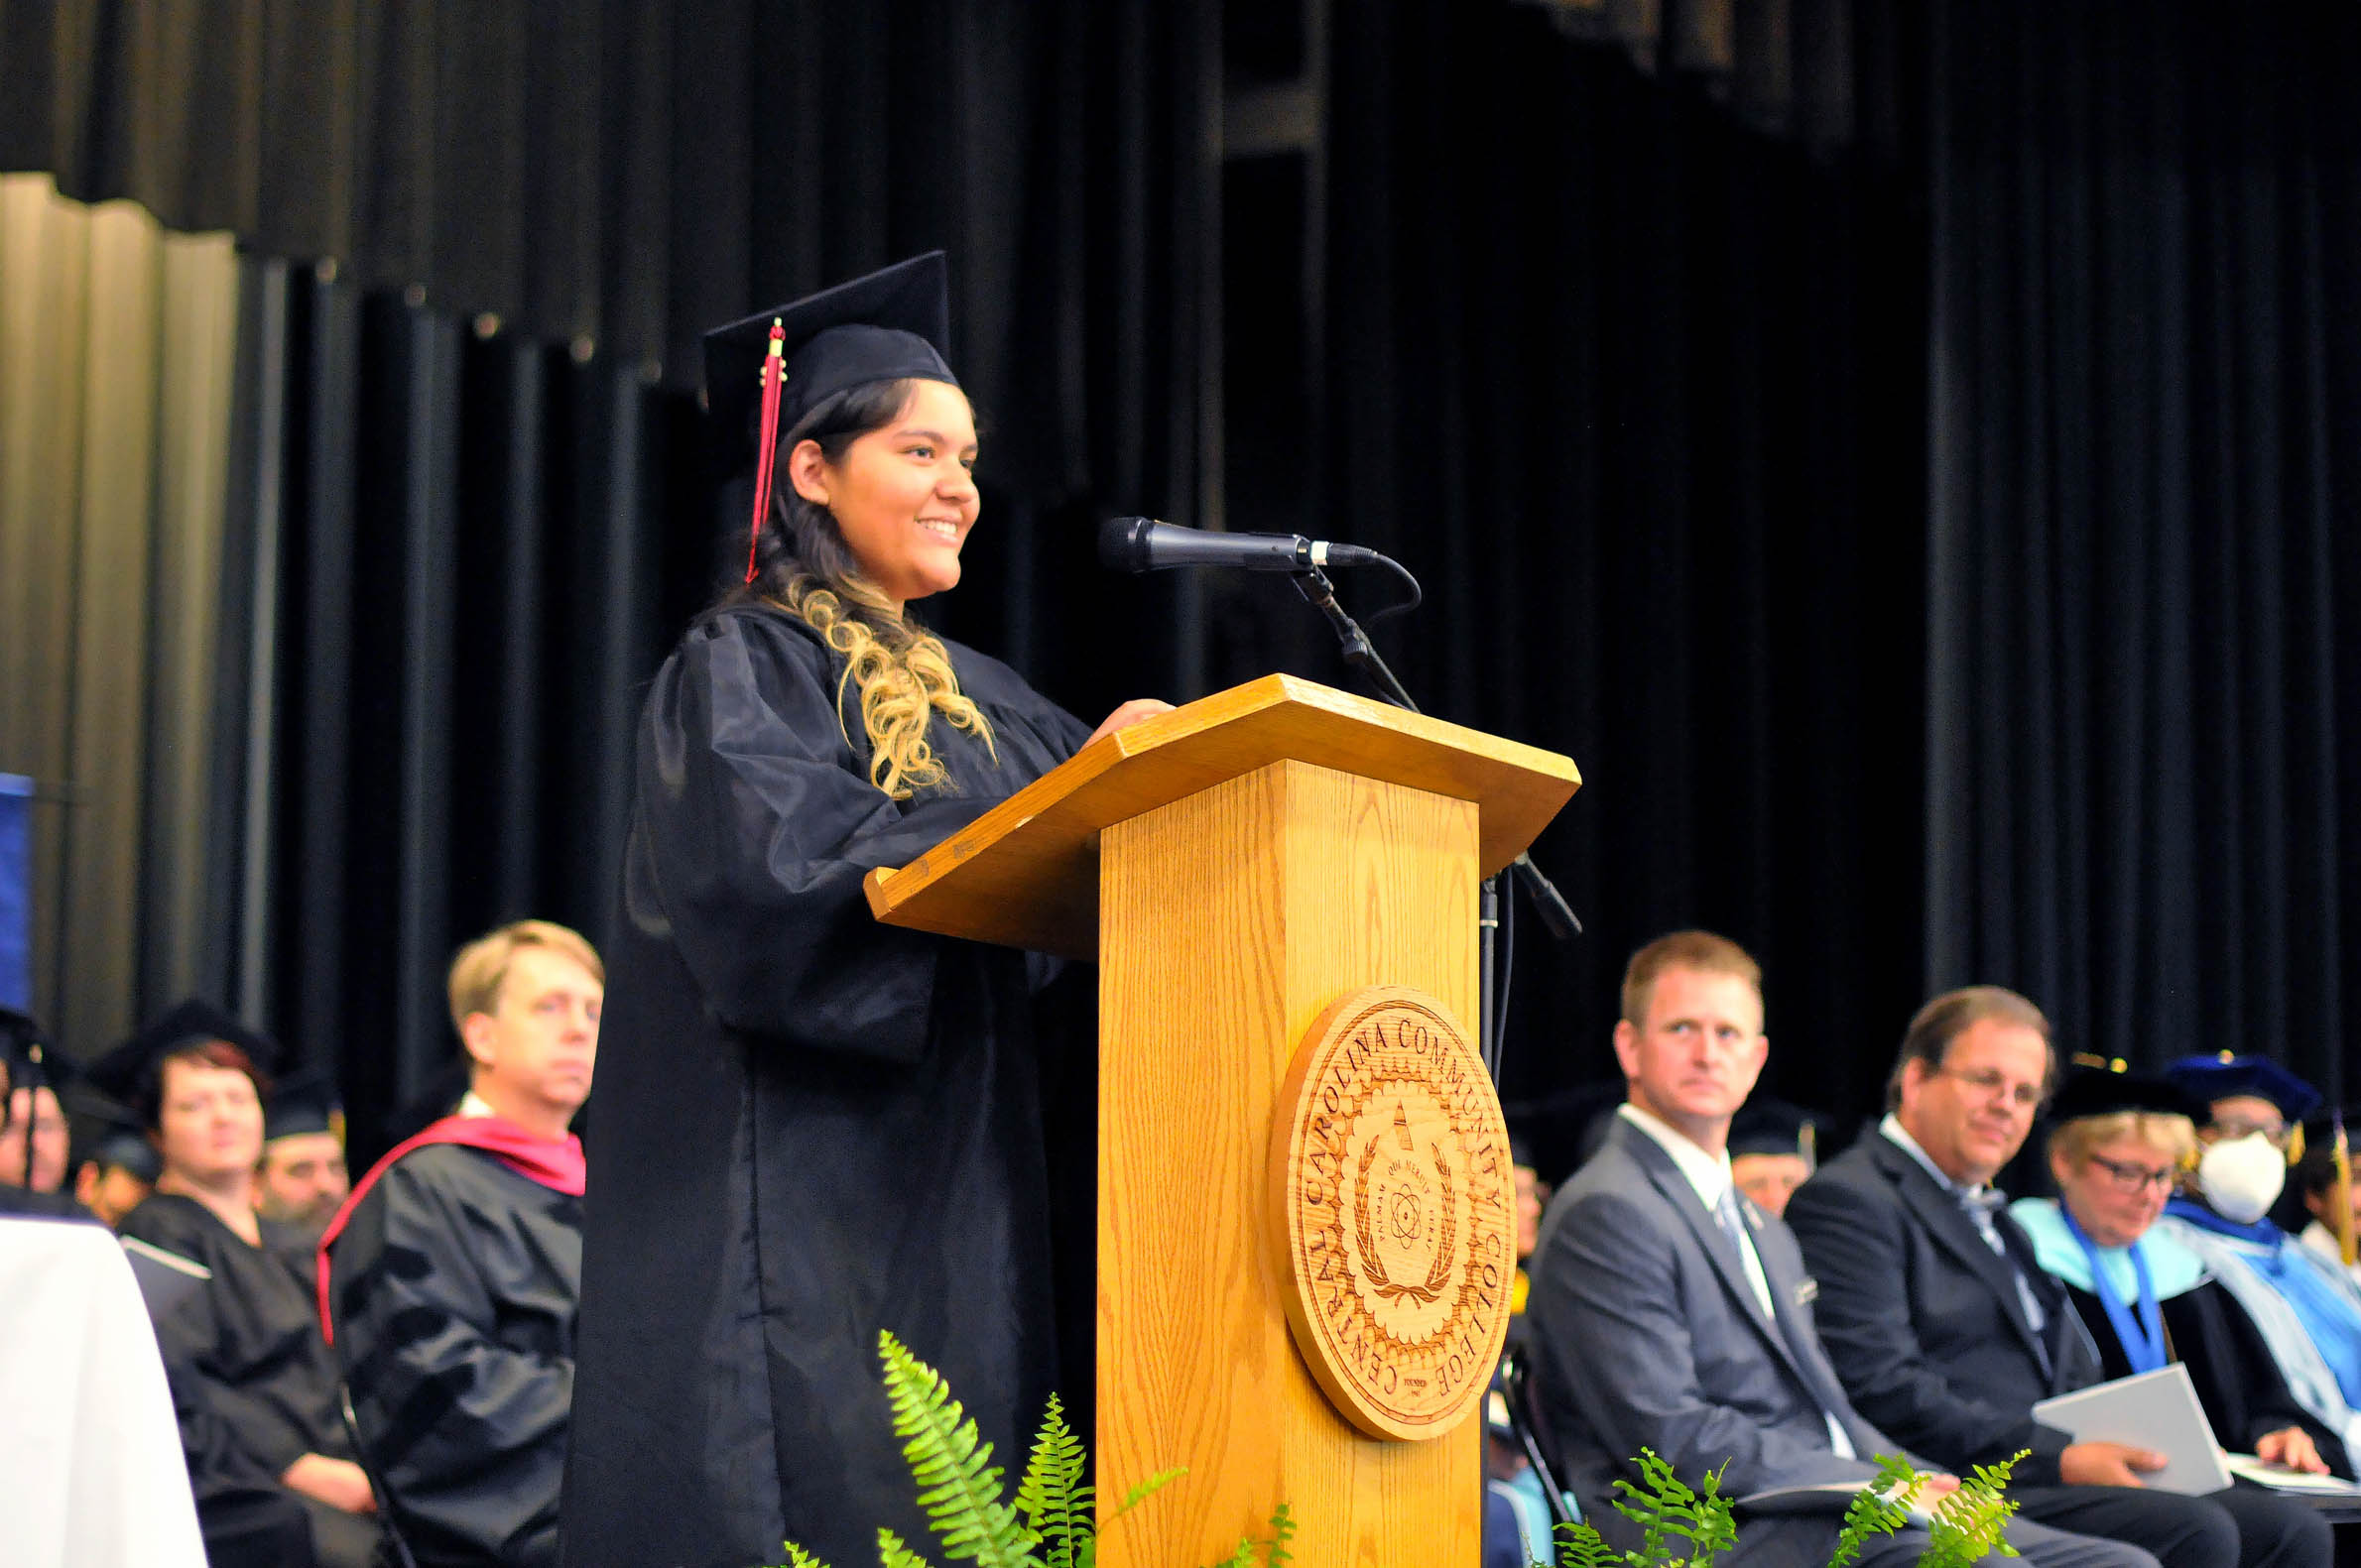 Click to enlarge,  Monserrath Montes-Bocanegra was one of the student speakers at the Central Carolina Community College summer graduation on Aug. 9 at the Dennis A. Wicker Civic &amp; Conference Center in Sanford. 